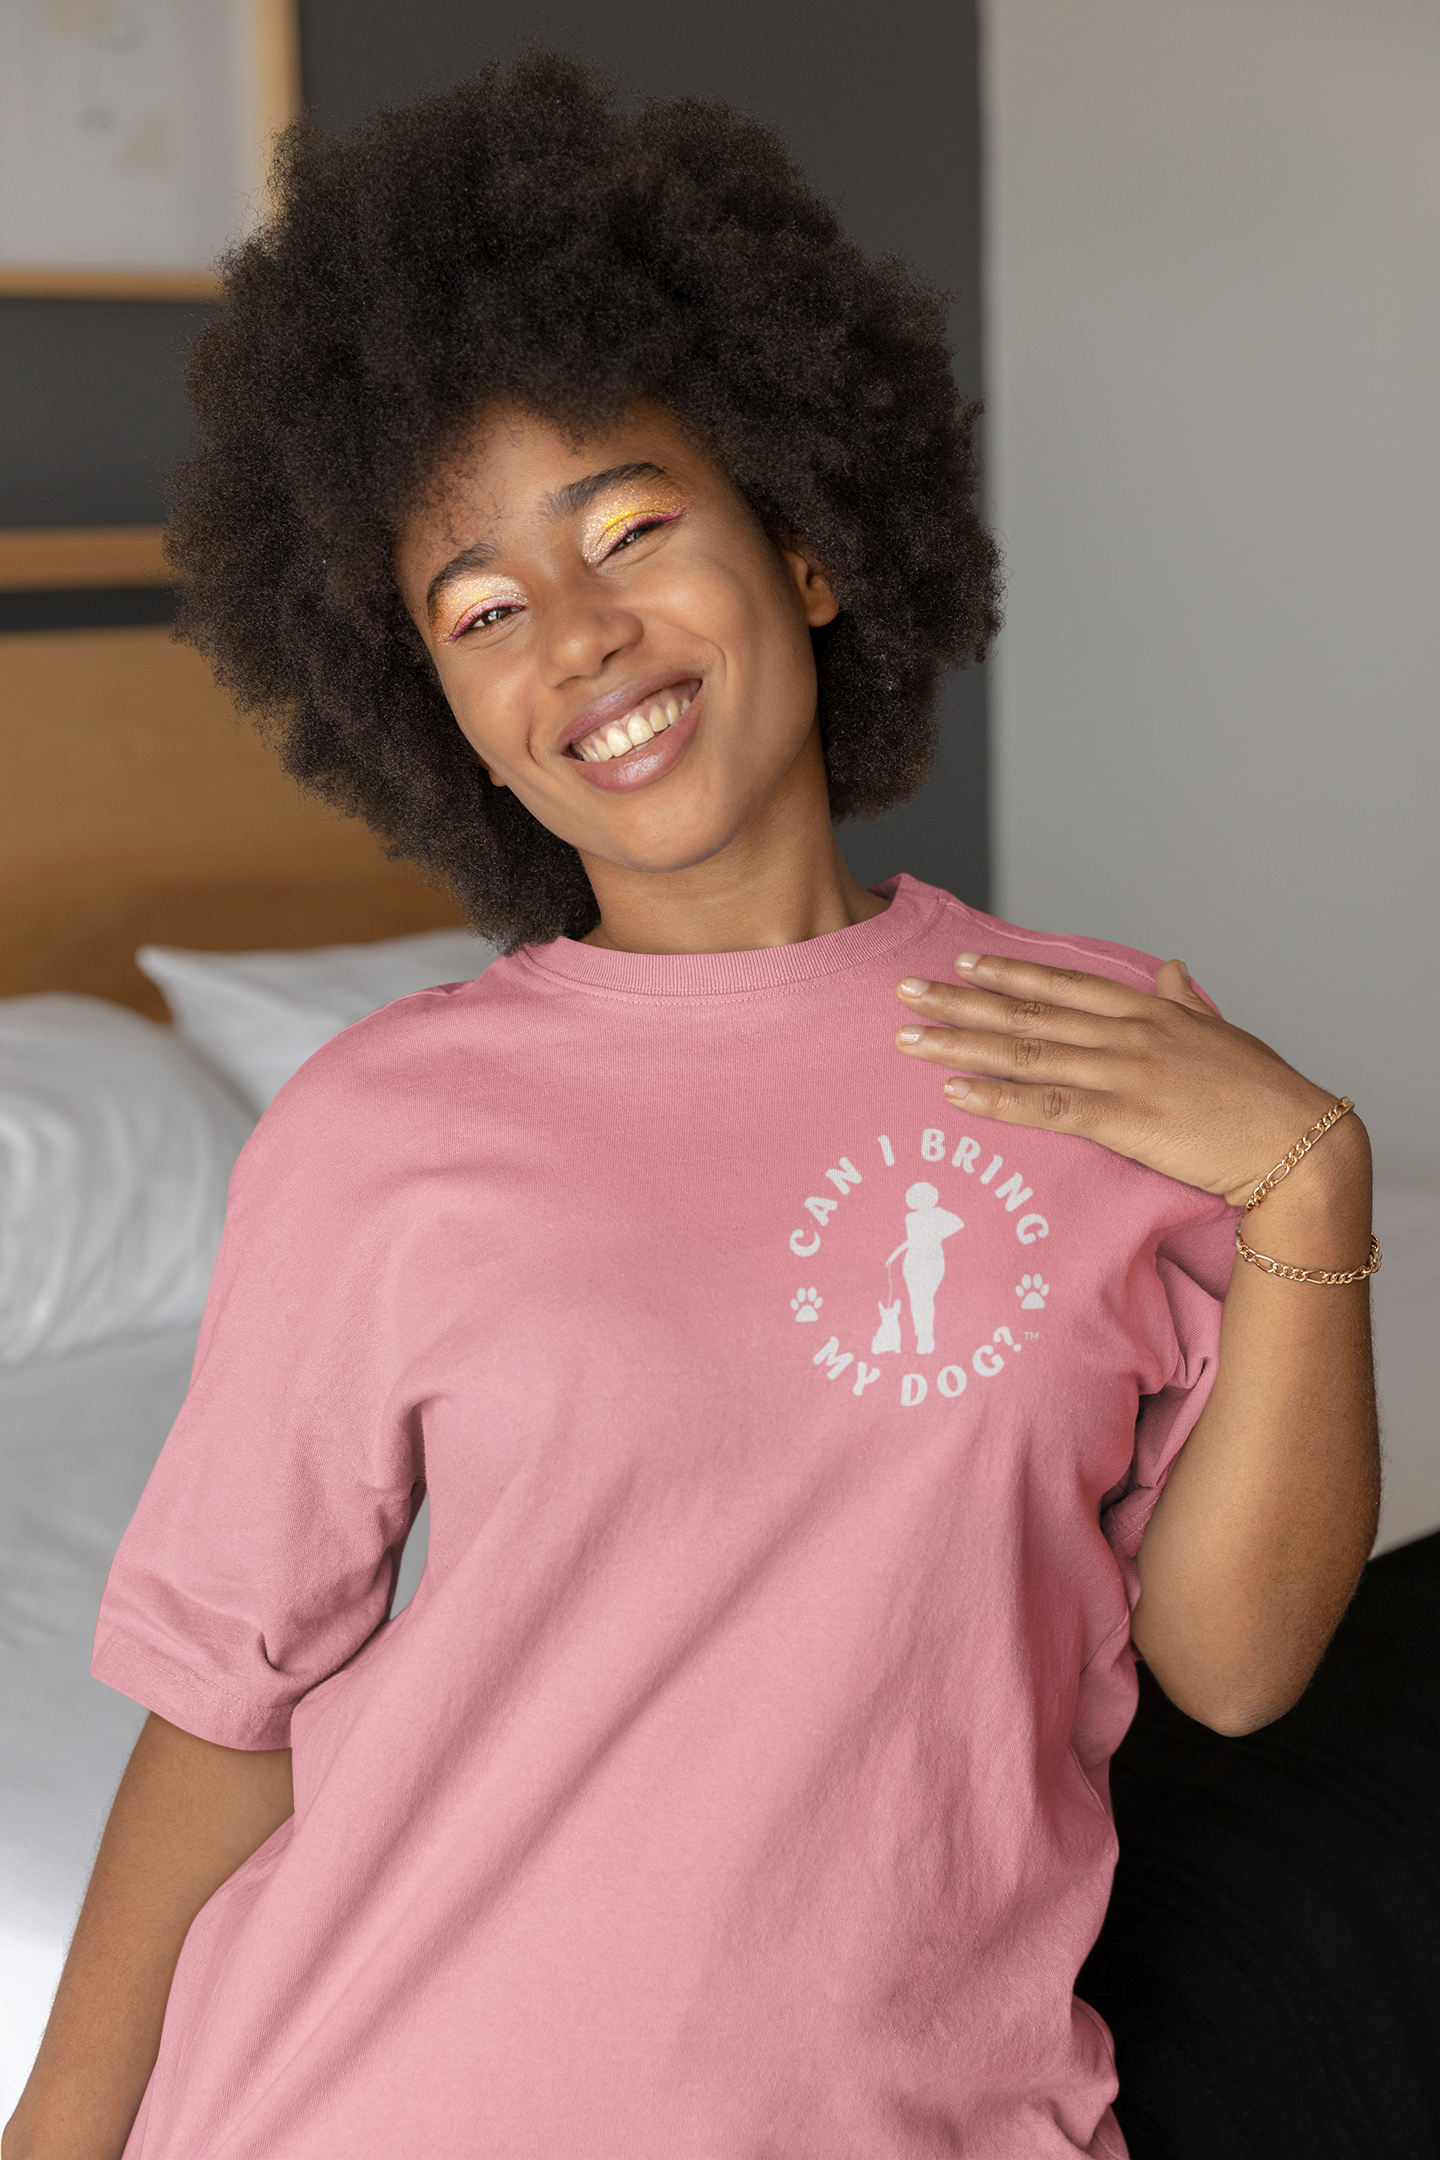 "Can I Bring My Dog?" - Black Woman Standing - Crew Neck Tee